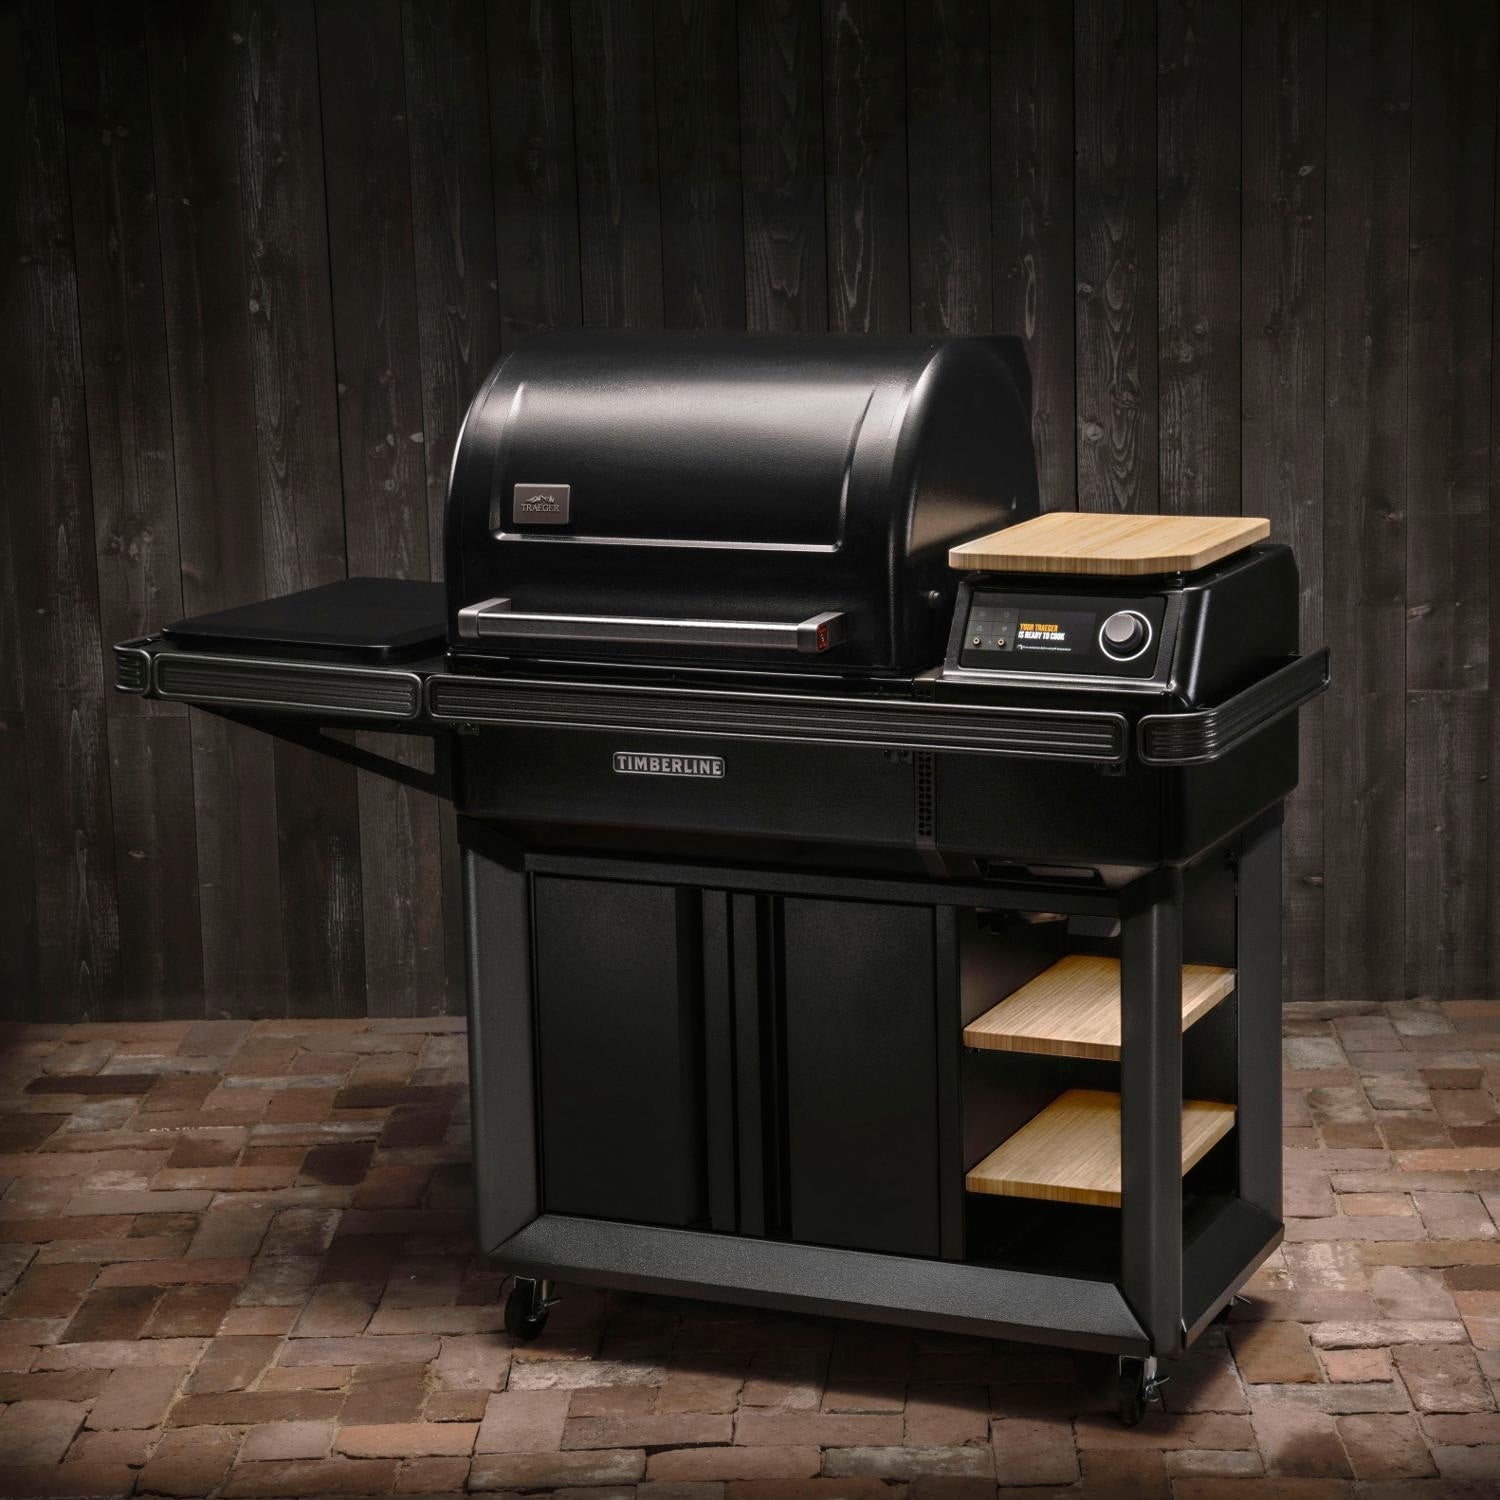 Using the Traeger Induction Cooktop 